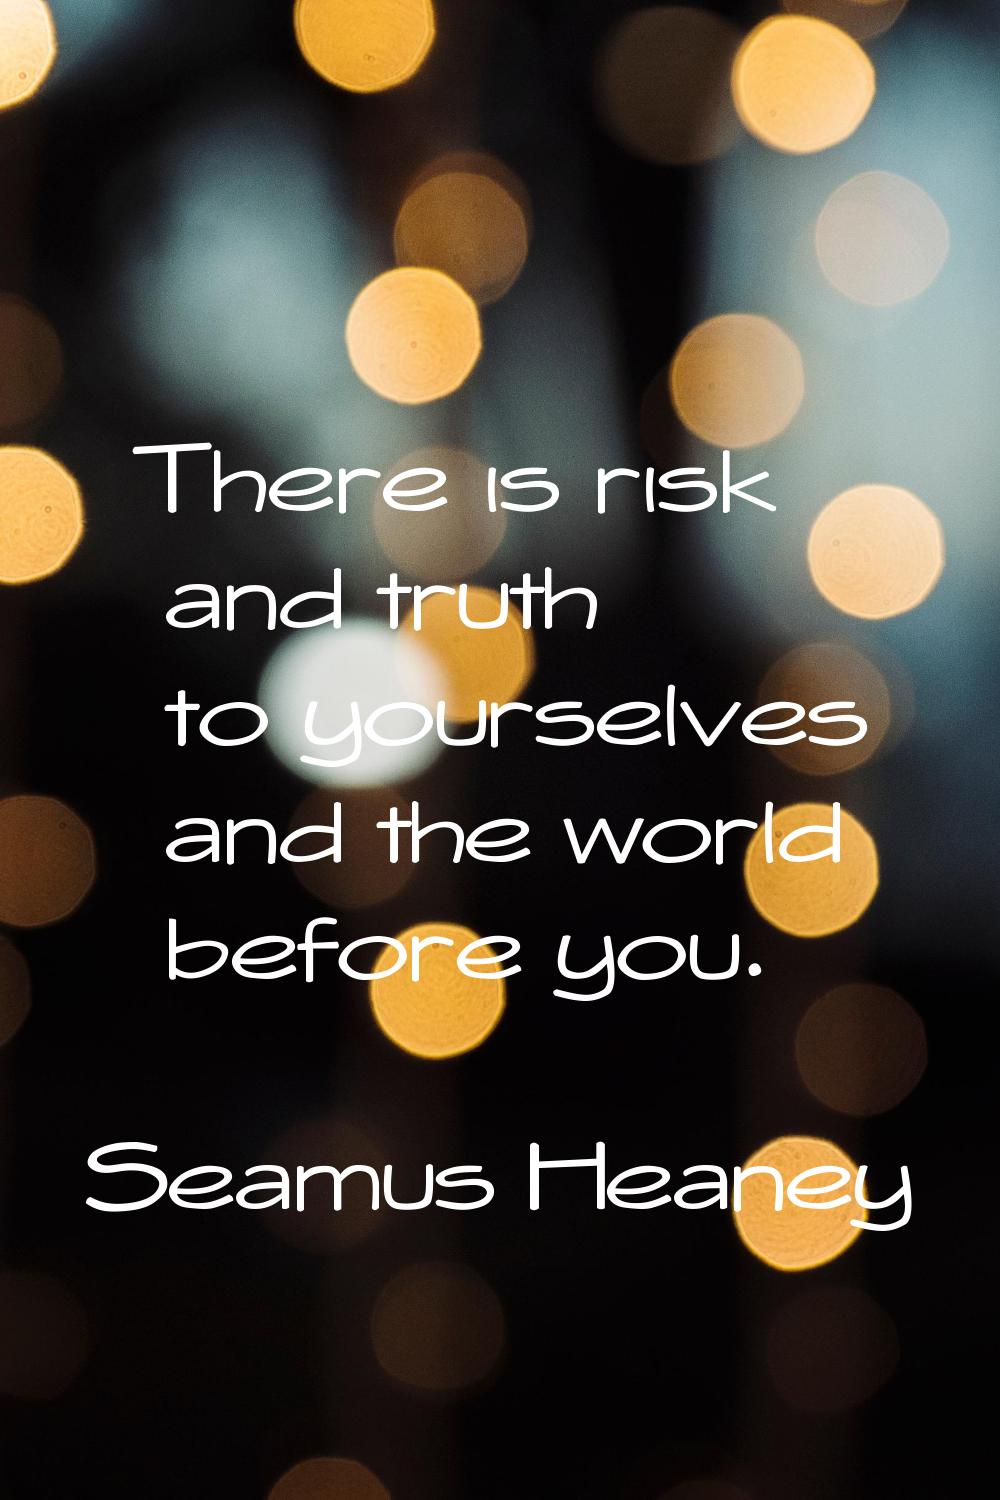 There is risk and truth to yourselves and the world before you.